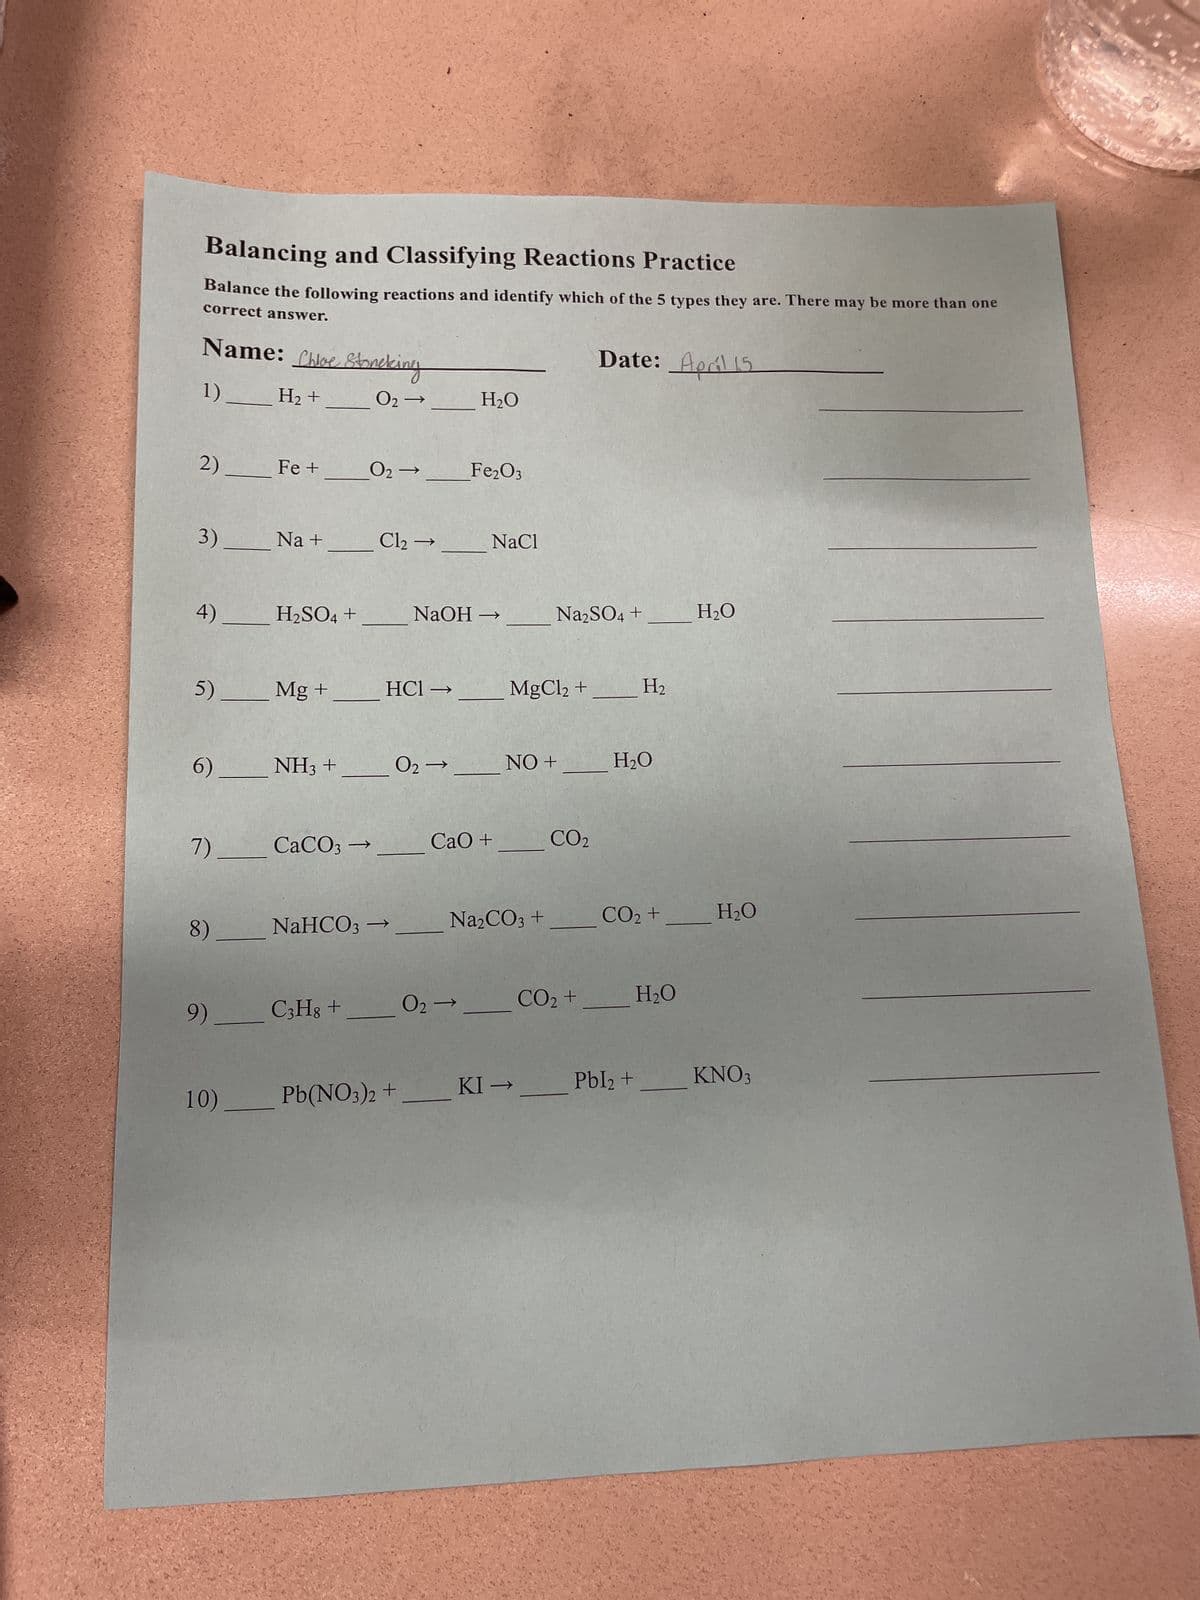 Balancing and Classifying Reactions Practice
Balance the following reactions and identify which of the 5 types they are. There may be more than one
correct answer.
Name: Shoe Stoneking
Date: April 15
1)
H2 +
02-
H₂O
2)
Fe +
02-
Fe2O3
3)
Na +
Cl2 →
NaCl
4)
H2SO4 +
NaOH
→
Na2SO4 +
H₂O
5)
Mg +
HCI->
MgCl2 +
H₂
6)
NH3 +
02->>
NO +
H₂O
7).
CaCO3-
→>
CaO +
CO2
8)
NaHCO3
-> _
Na2CO3 +
CO2 +
H₂O
9)
C3H8 +
02-
CO2 +
H₂O
10) _______ Pb(NO3)2 +
KI-
Pbl₂ +
KNO3